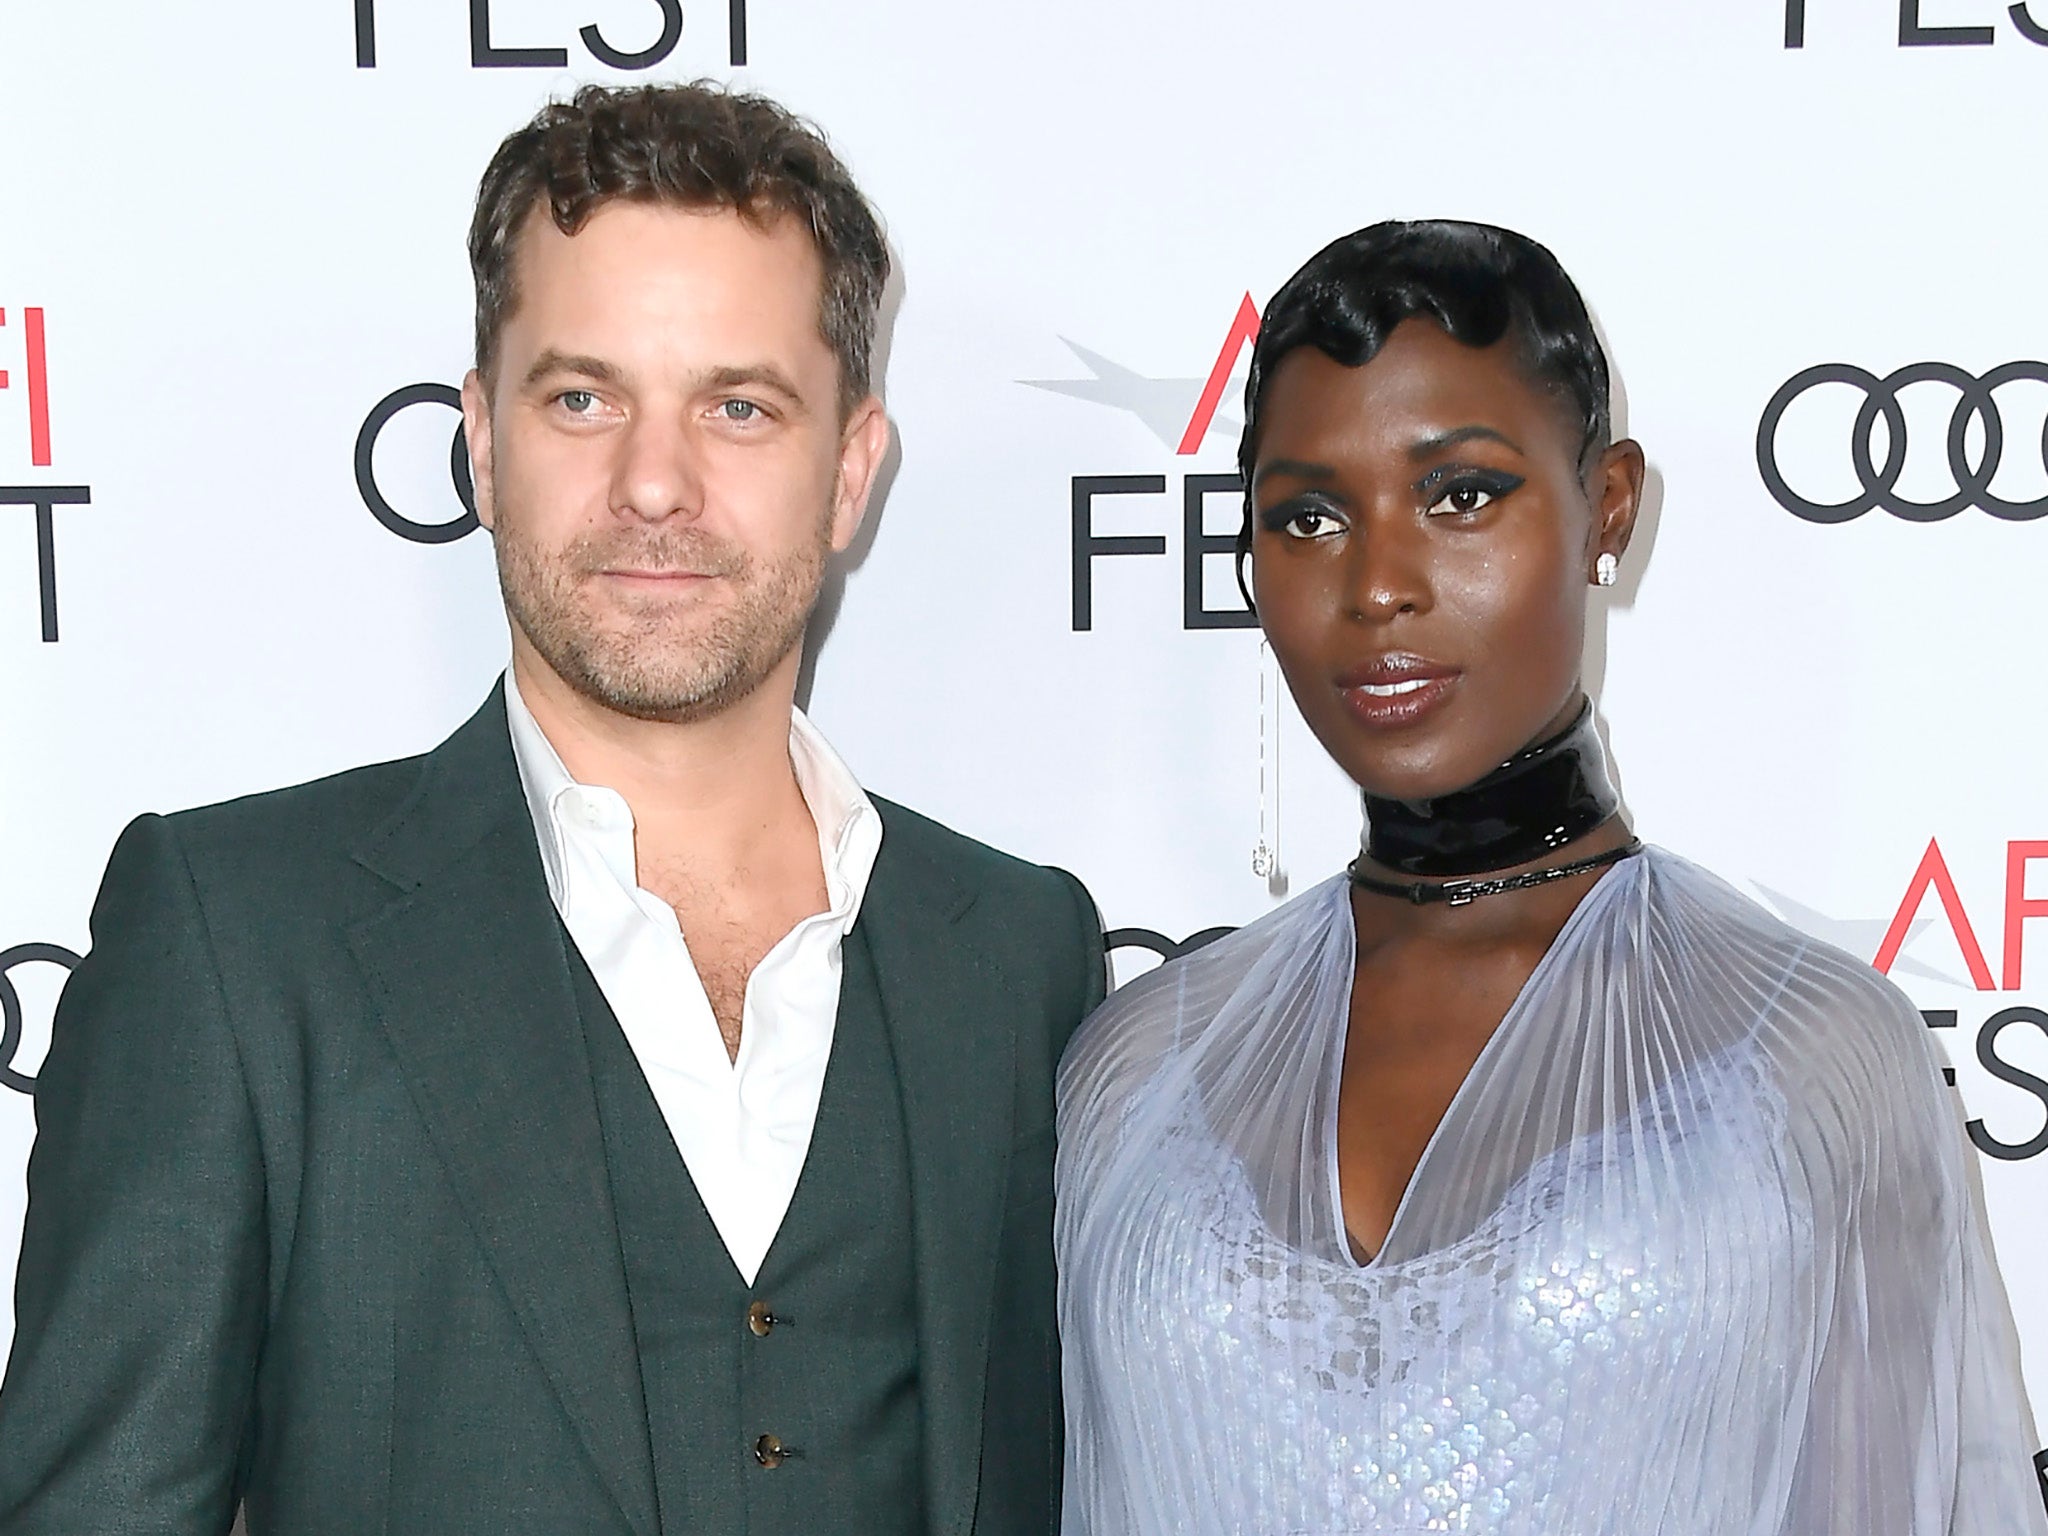 Power couple: Jackson and Jodie Turner-Smith at a film premiere in 2019